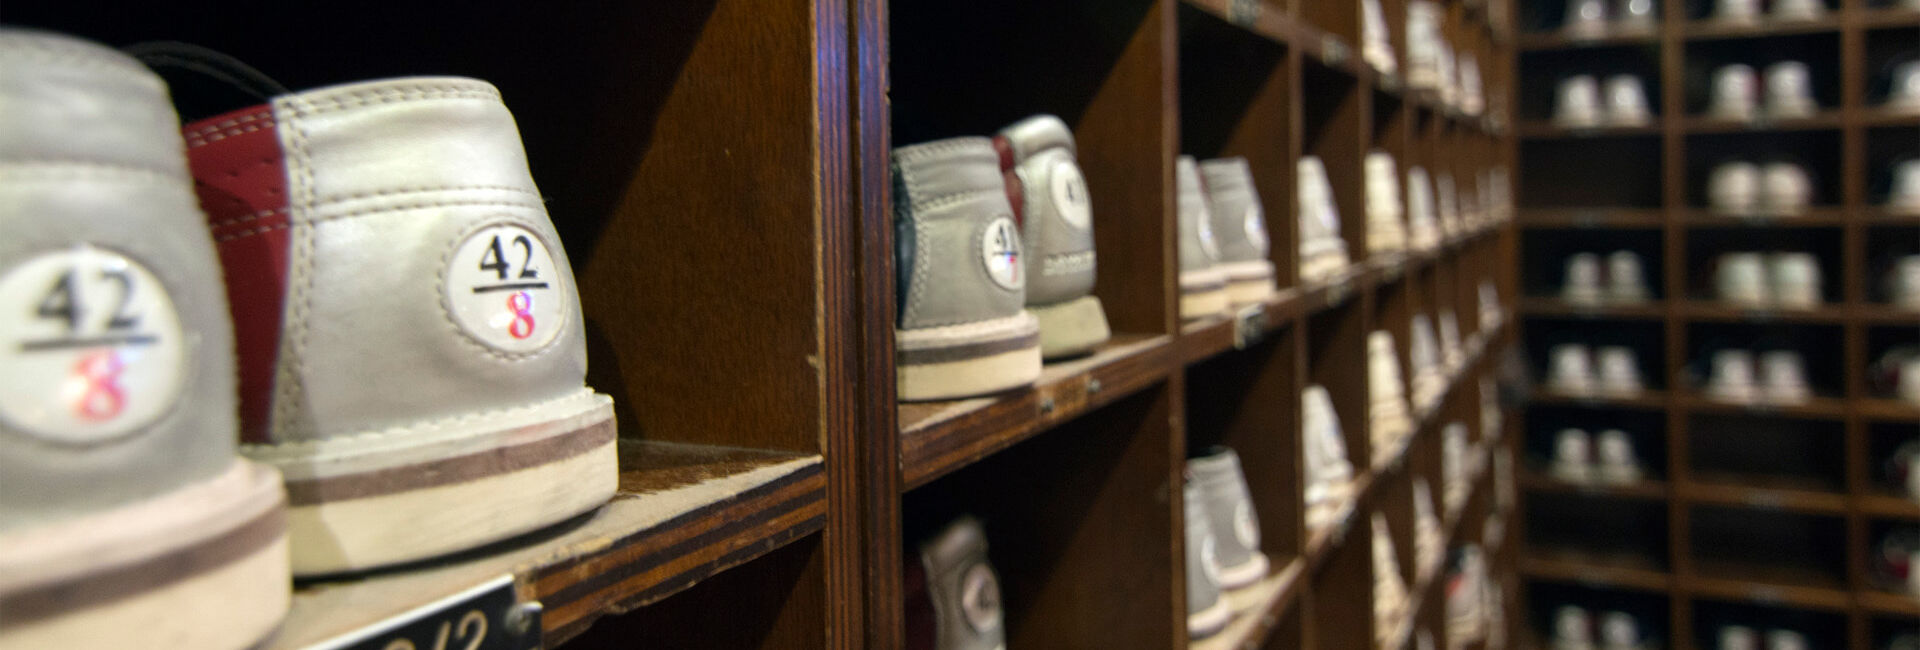 Shelves with bowling shoes in various sizes